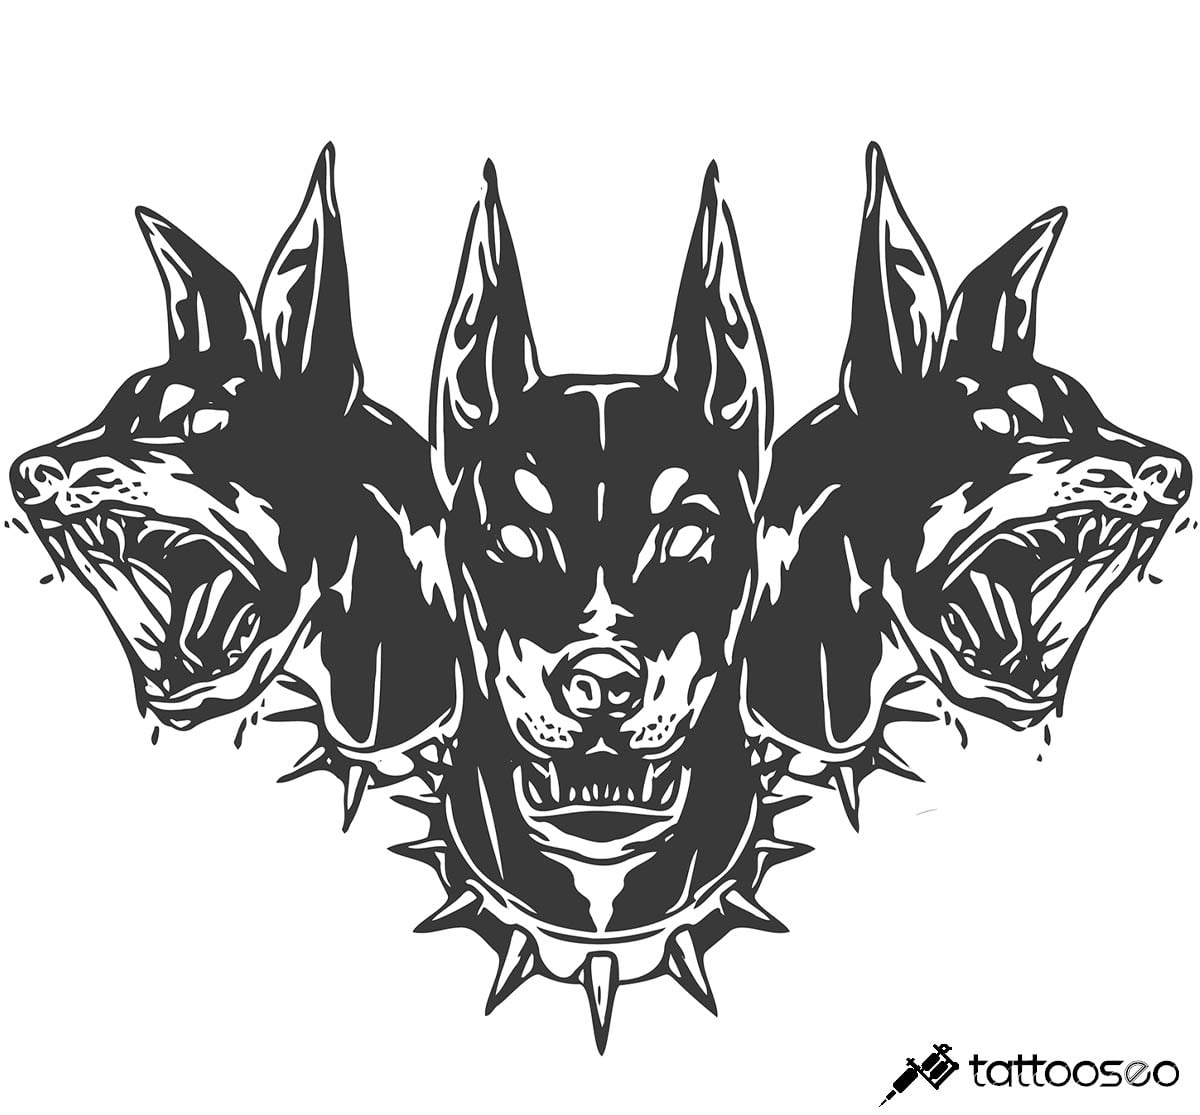 Cerberus Black Hellhound and angry snake Mythological three headed dog the  guard of entrance to hell Hound of Hades banner emblem with ribbon  scroll Tattoo Shirt design template Graphic style vector illustration